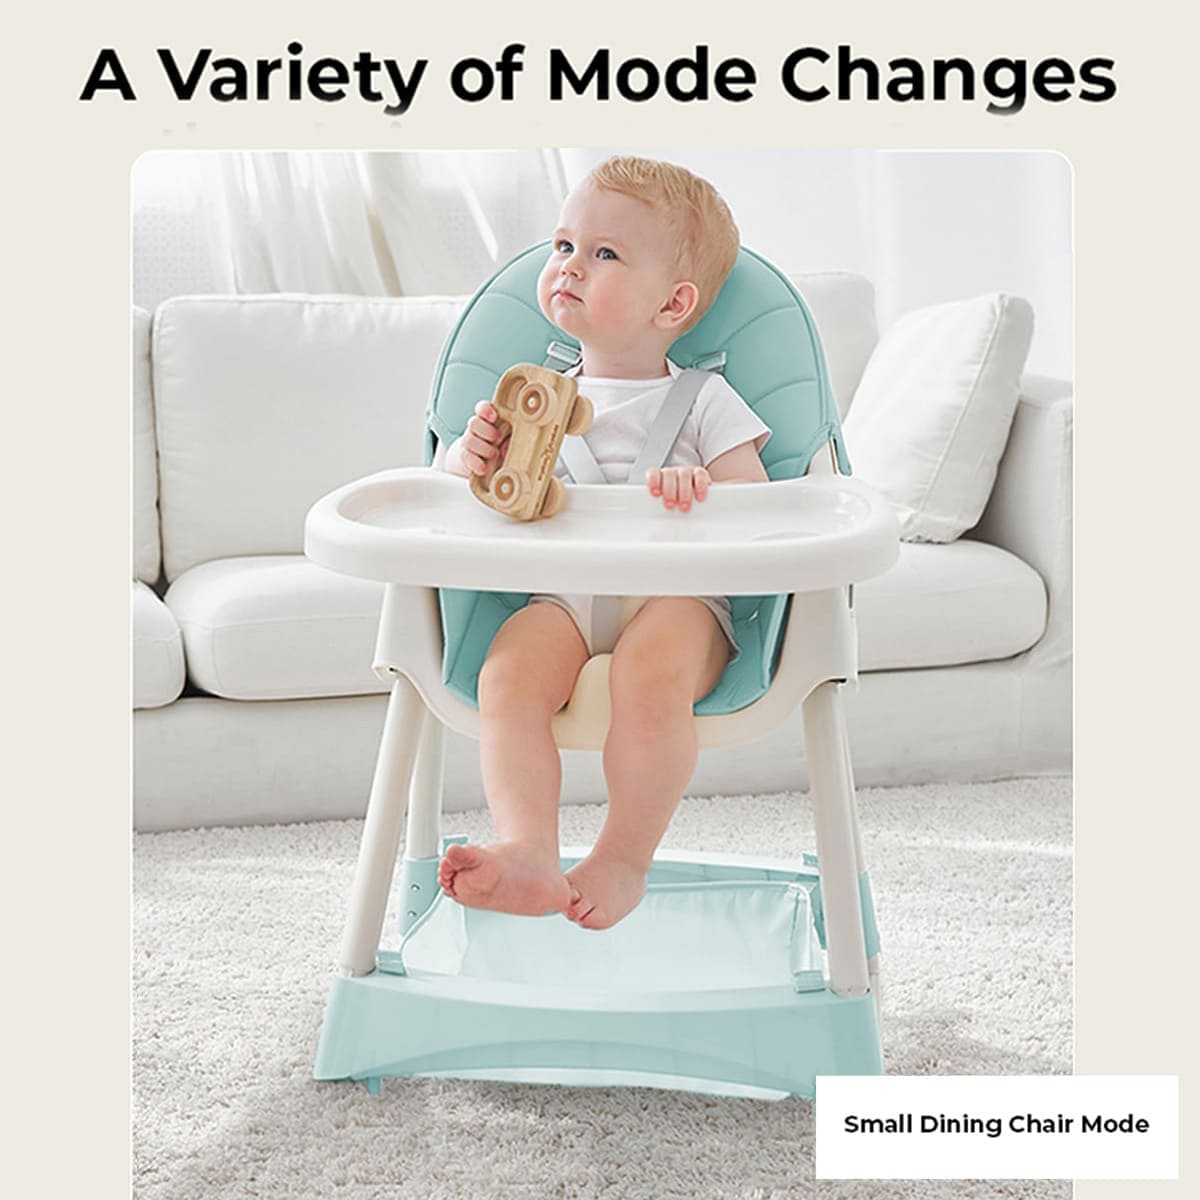 Adjustable Footrest Feature in Baby Feeding High Chair